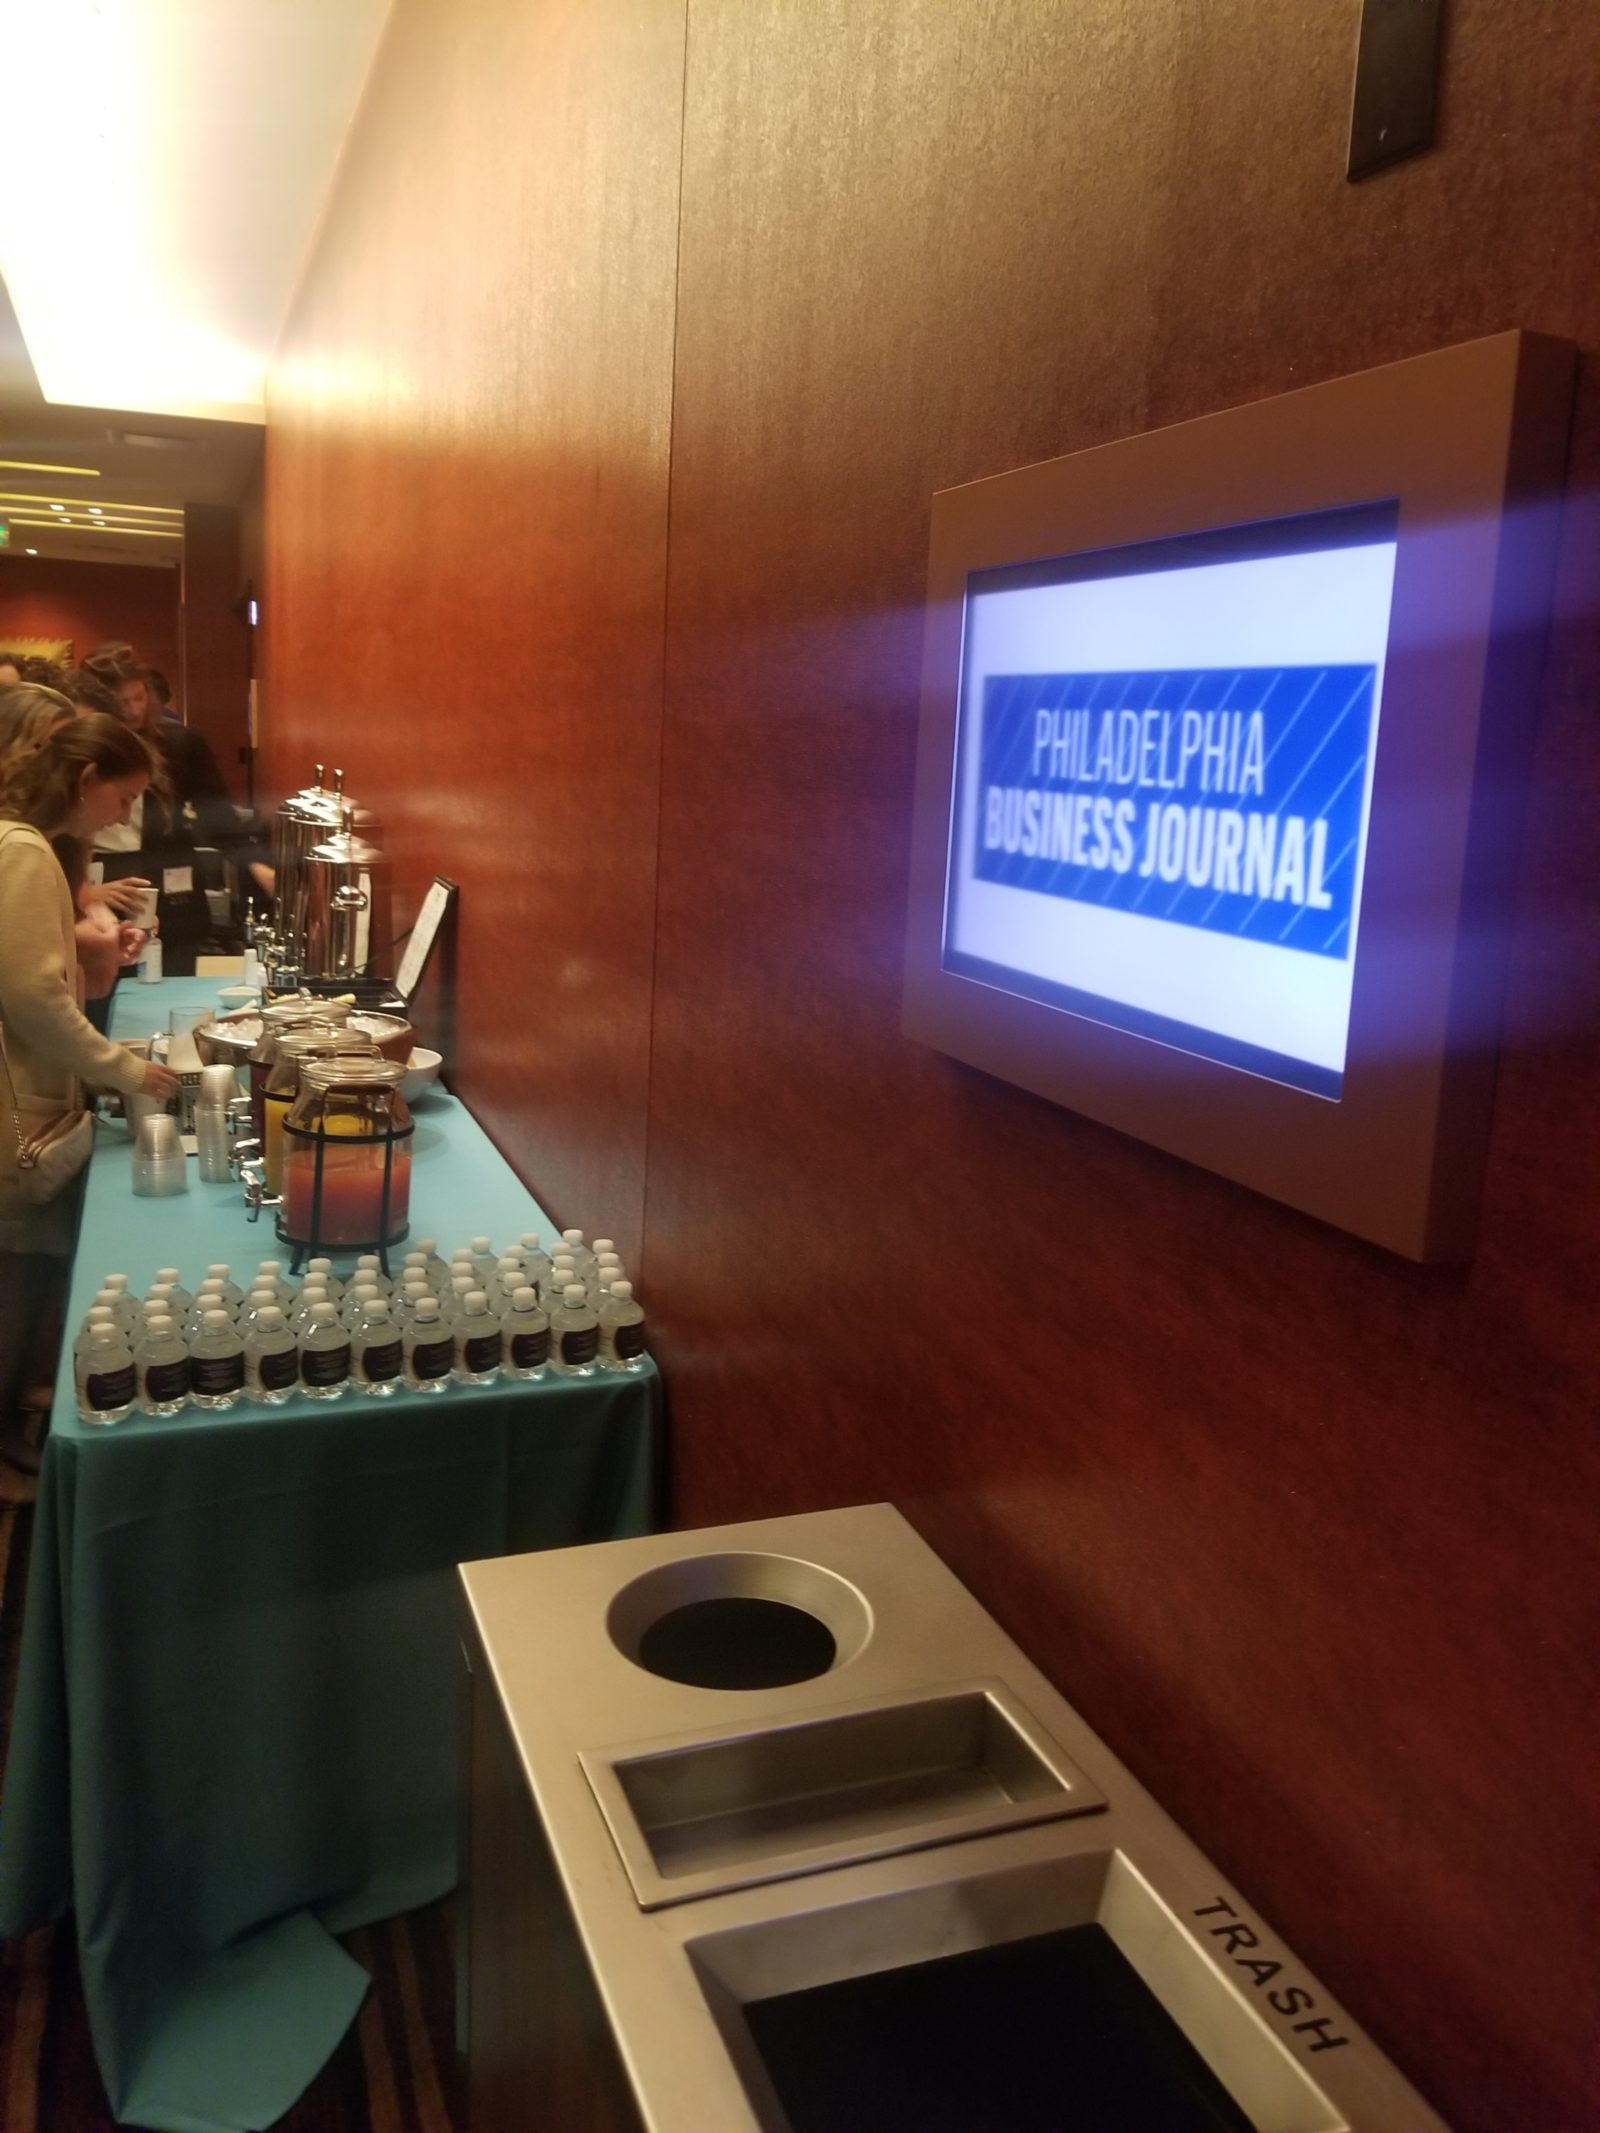 Lobby of convention center with table of refreshments. TV on wall with Philadelphia Business Journal's logo projected.